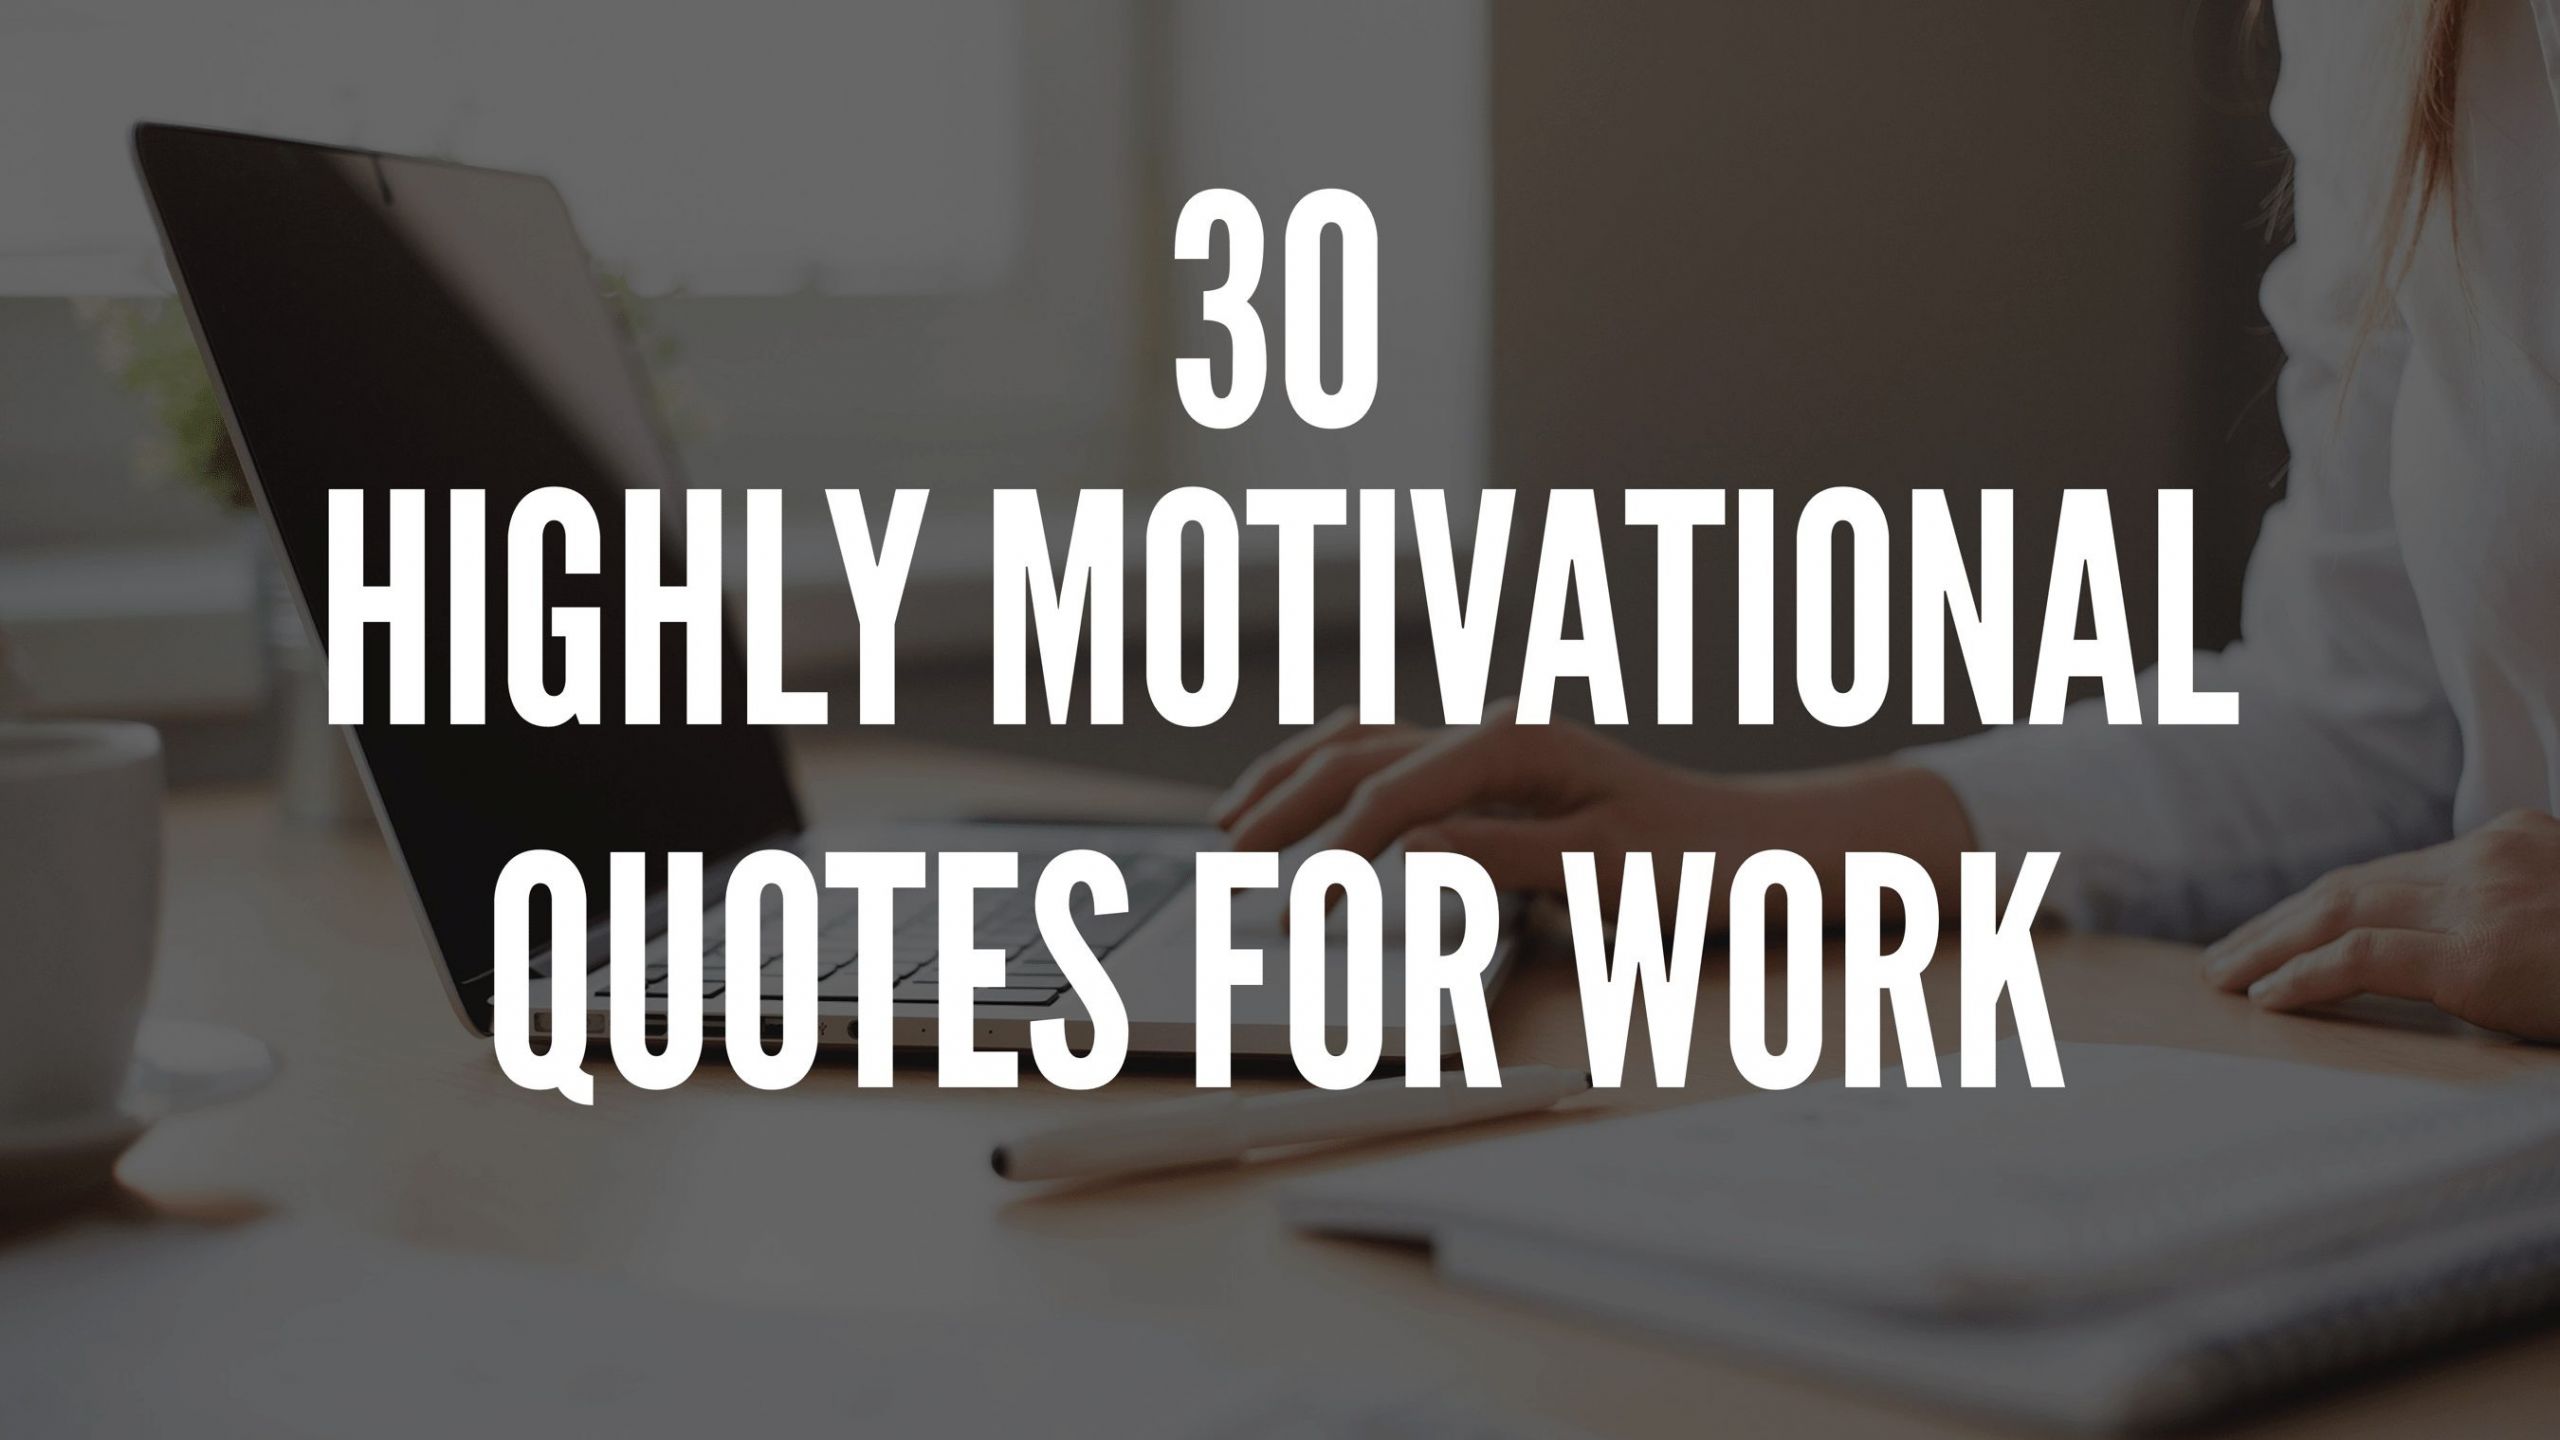 Motivational Work Quotes
 Amazing Quotes on Flipboard by Damien Thomas